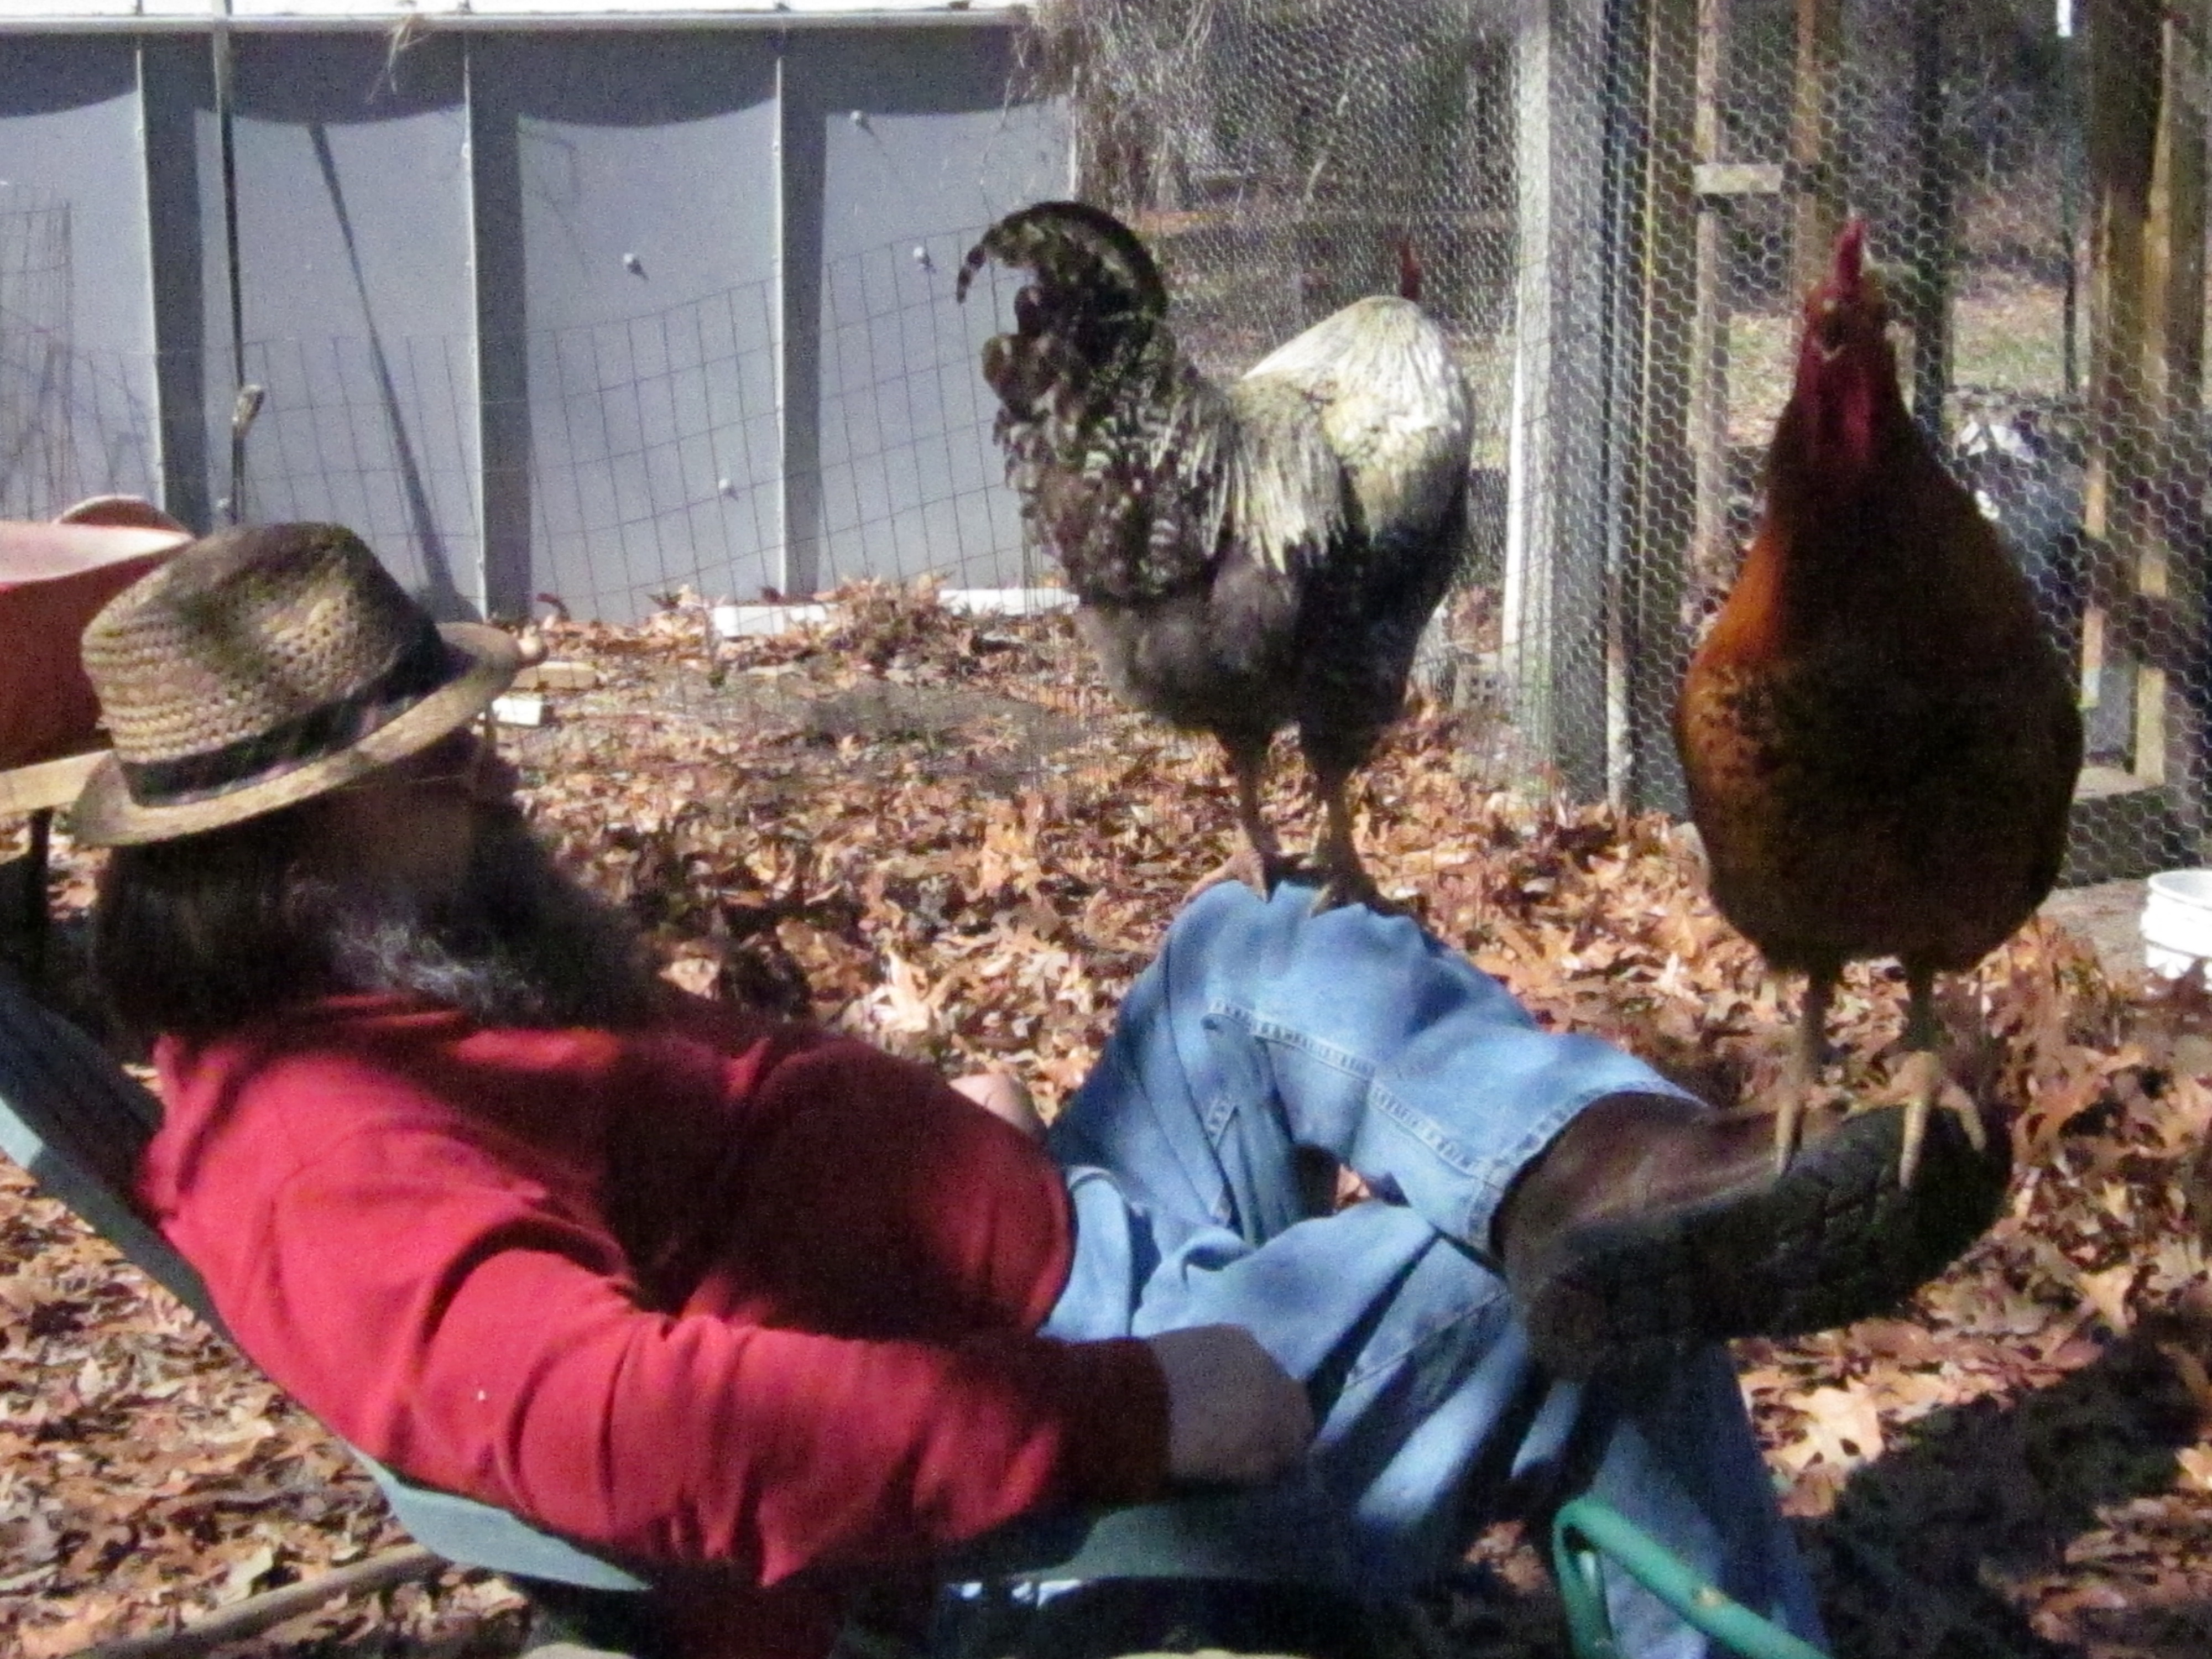 Chillin' with the roosters.